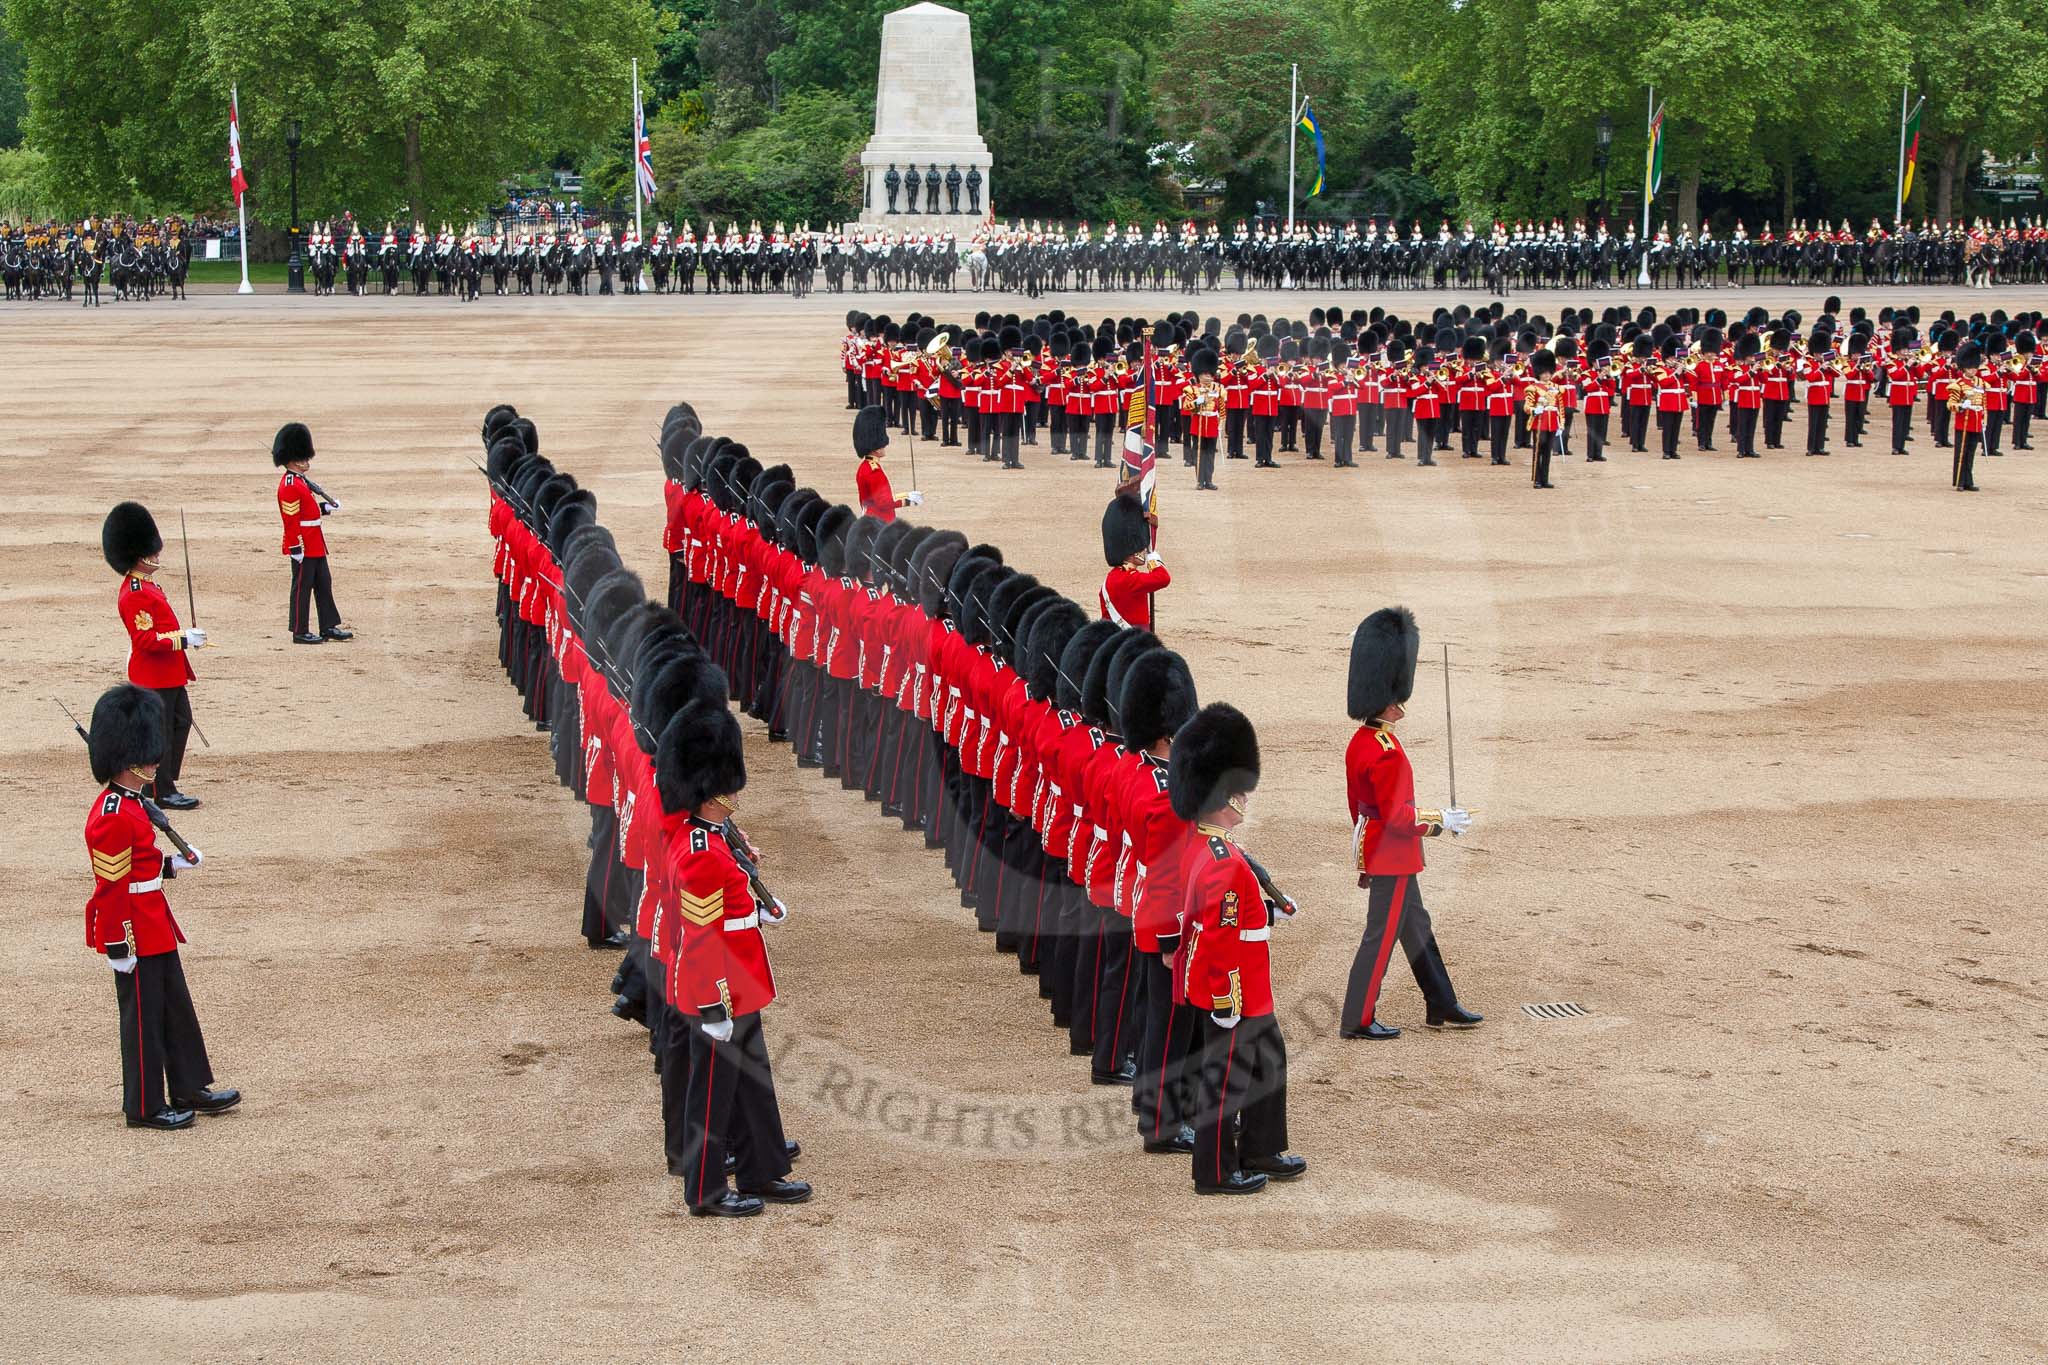 Major General's Review 2013: The March Past in Slow Time - the Ensign, Second Lieutenant Joel Dinwiddle, in front of No. 1 Guard, the Escort to the Colour..
Horse Guards Parade, Westminster,
London SW1,

United Kingdom,
on 01 June 2013 at 11:34, image #488